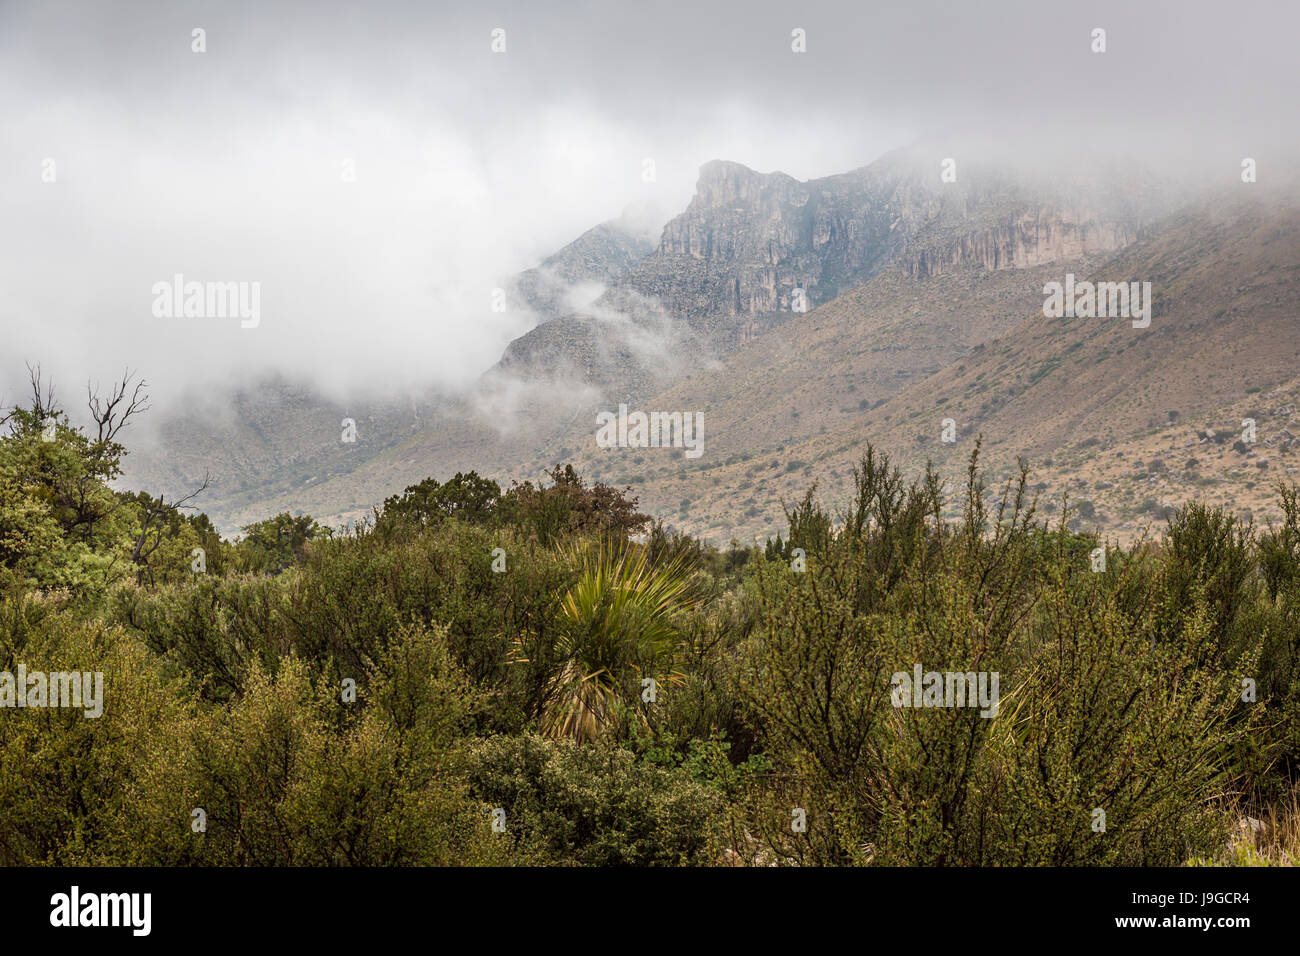 Pine Springs, Texas - A storm over the Guadalupe Mountains in Guadalupe Mountains National Park. Stock Photo